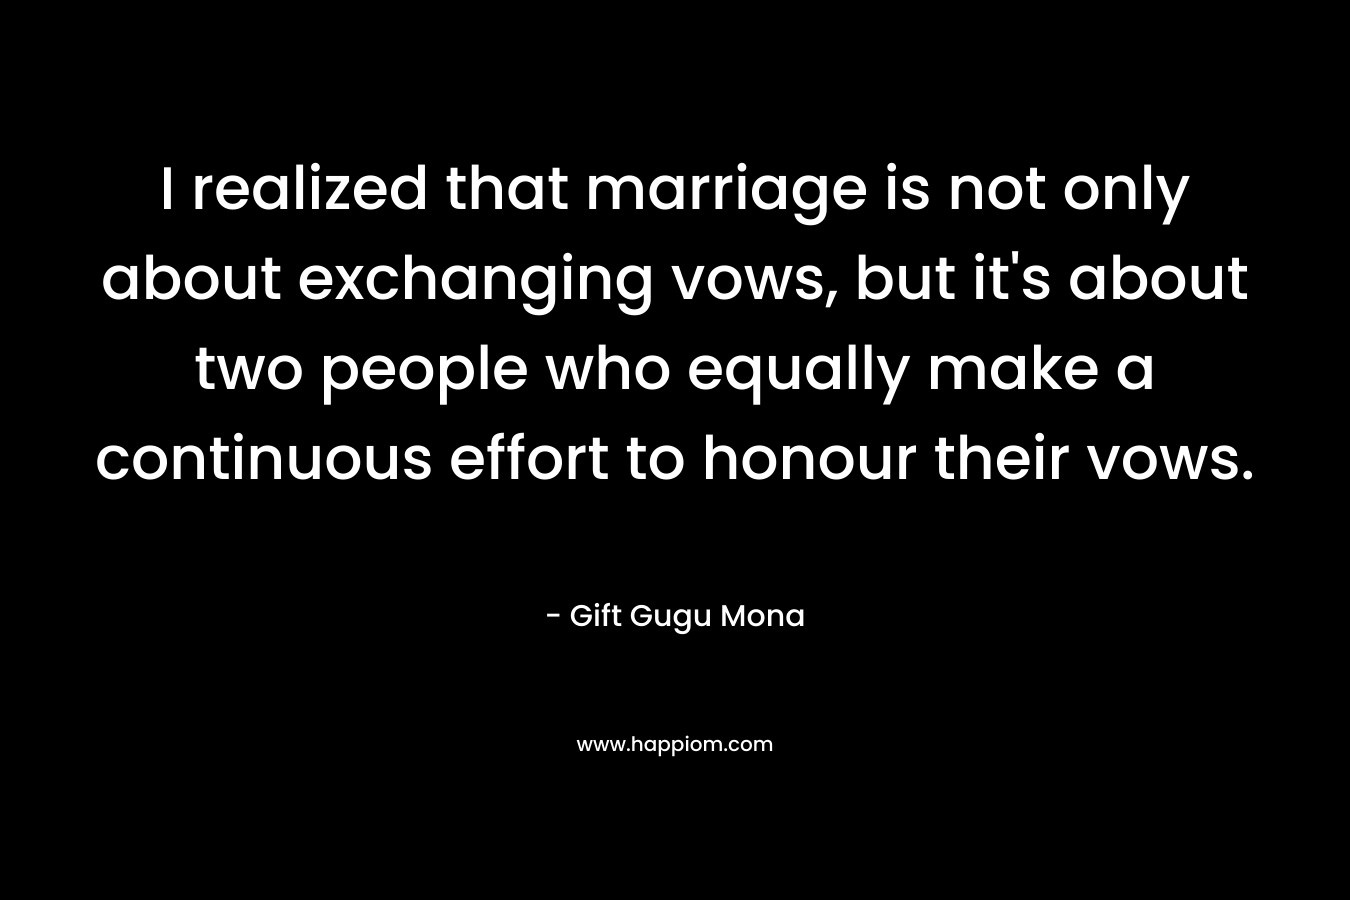 I realized that marriage is not only about exchanging vows, but it’s about two people who equally make a continuous effort to honour their vows. – Gift Gugu Mona